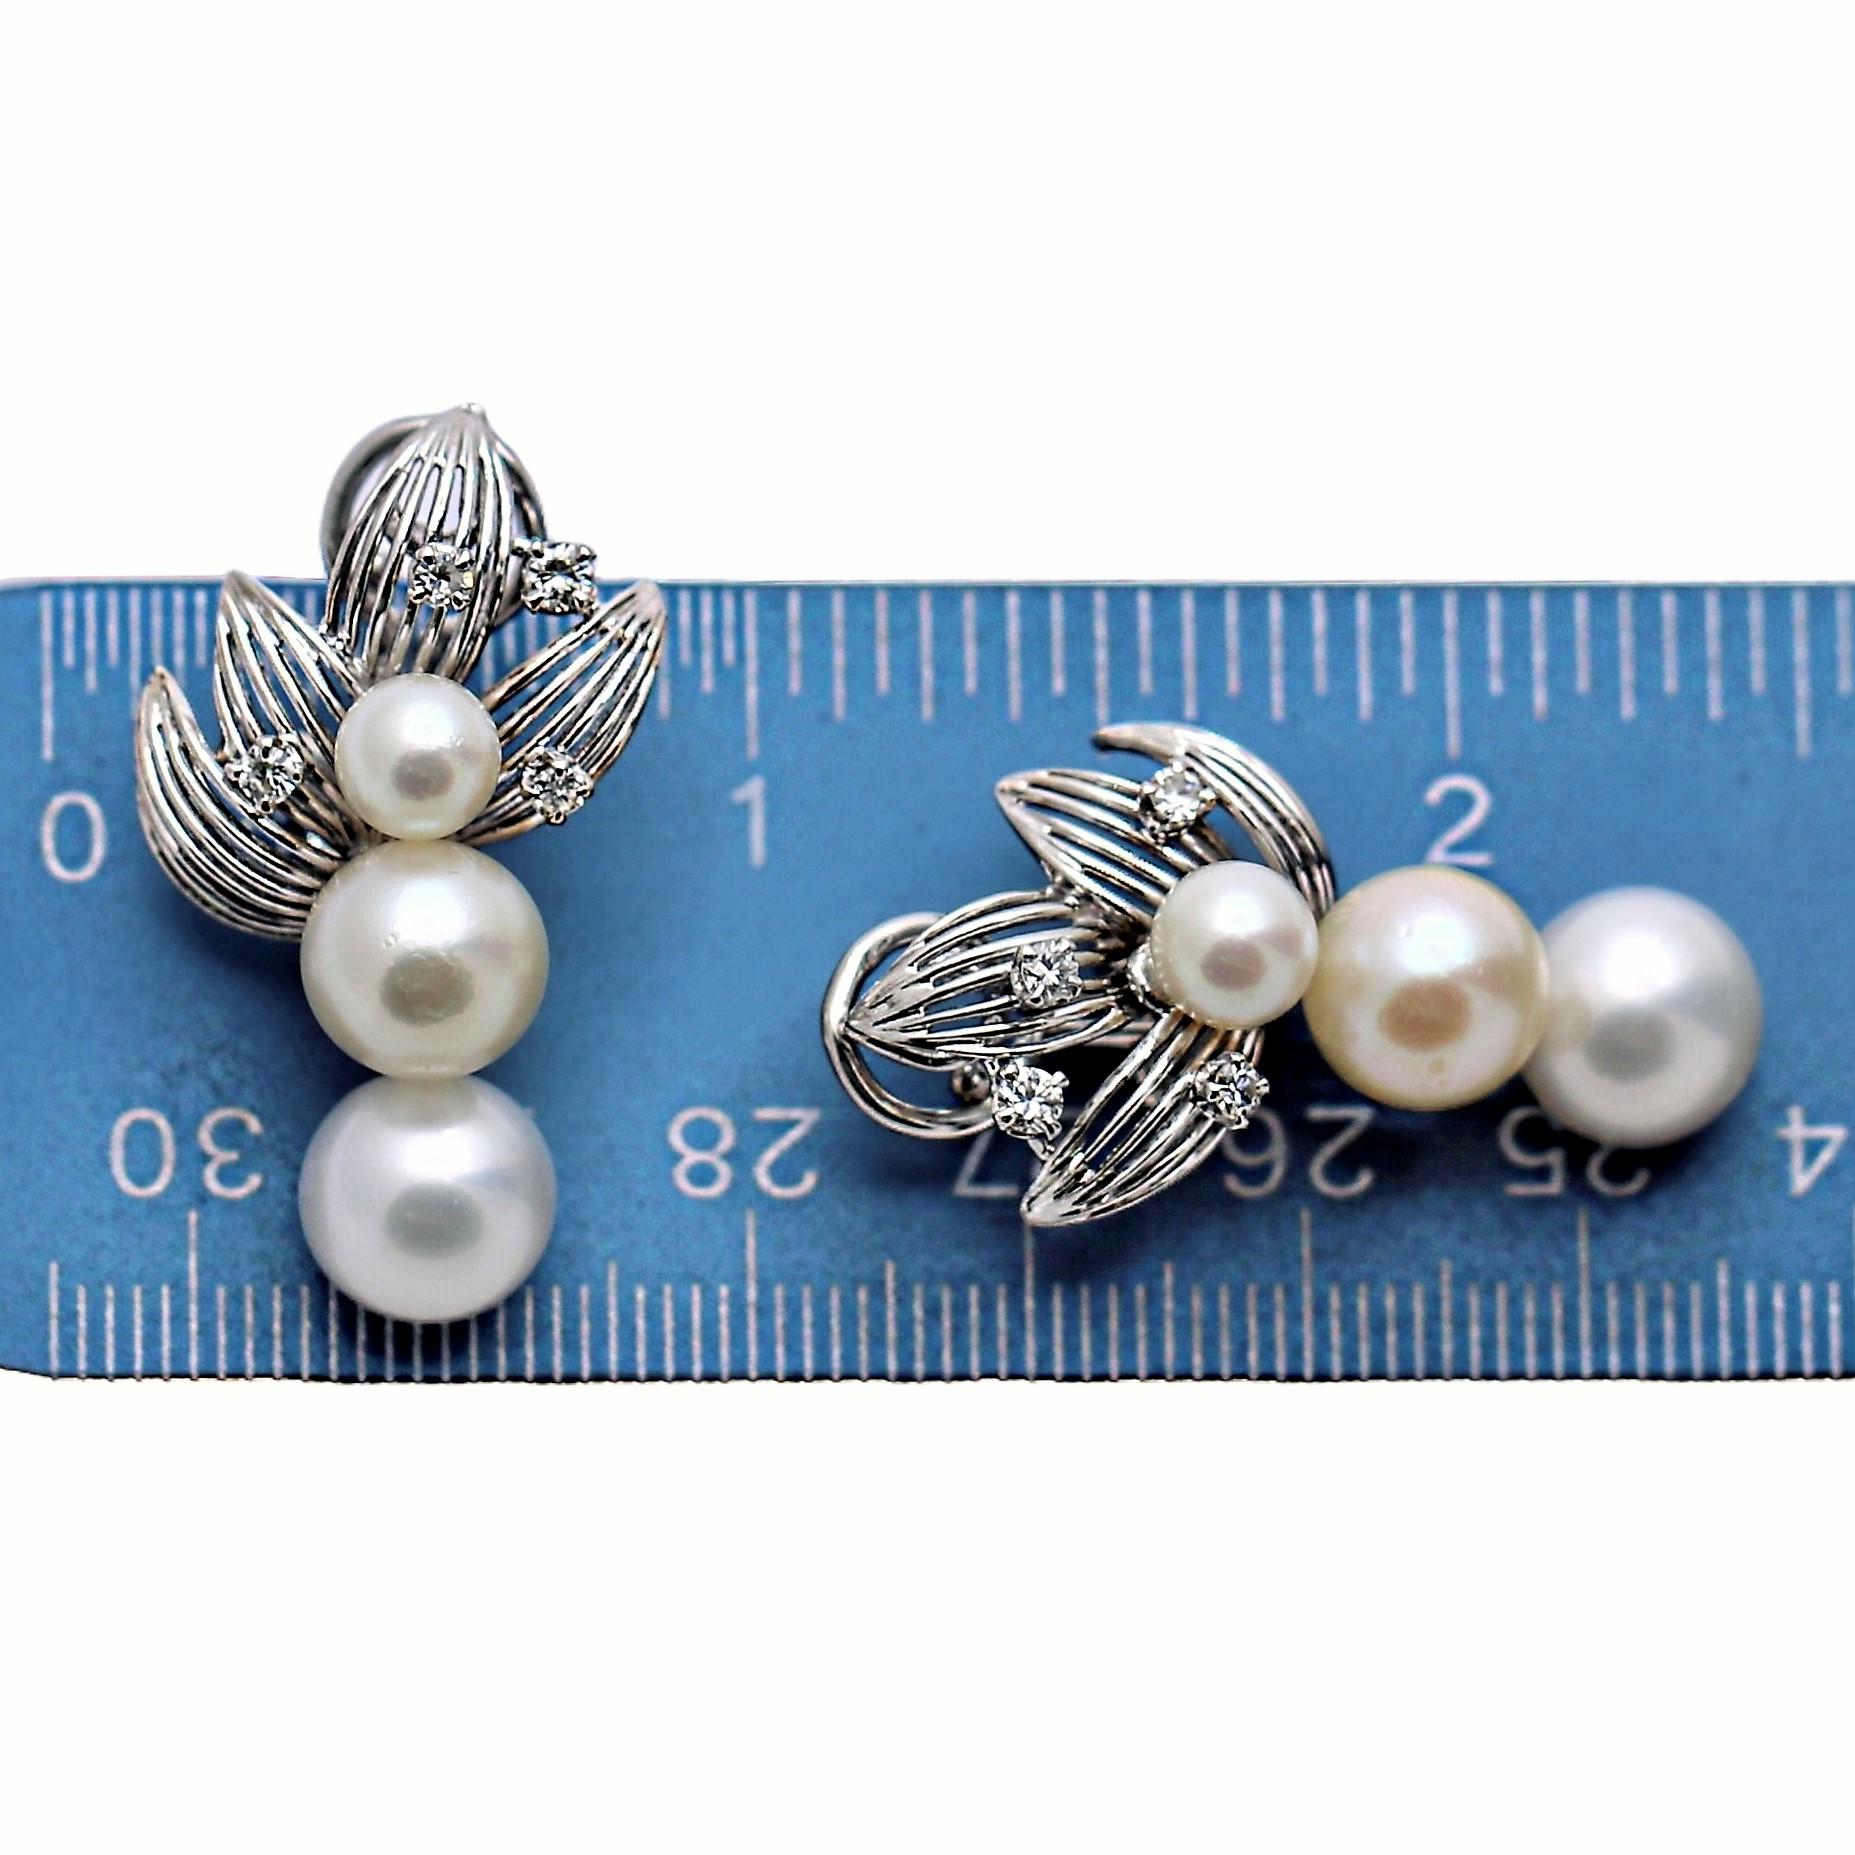 Women's French Mid-20th Century 18K White Gold, Pearl and Diamond Earrings For Sale